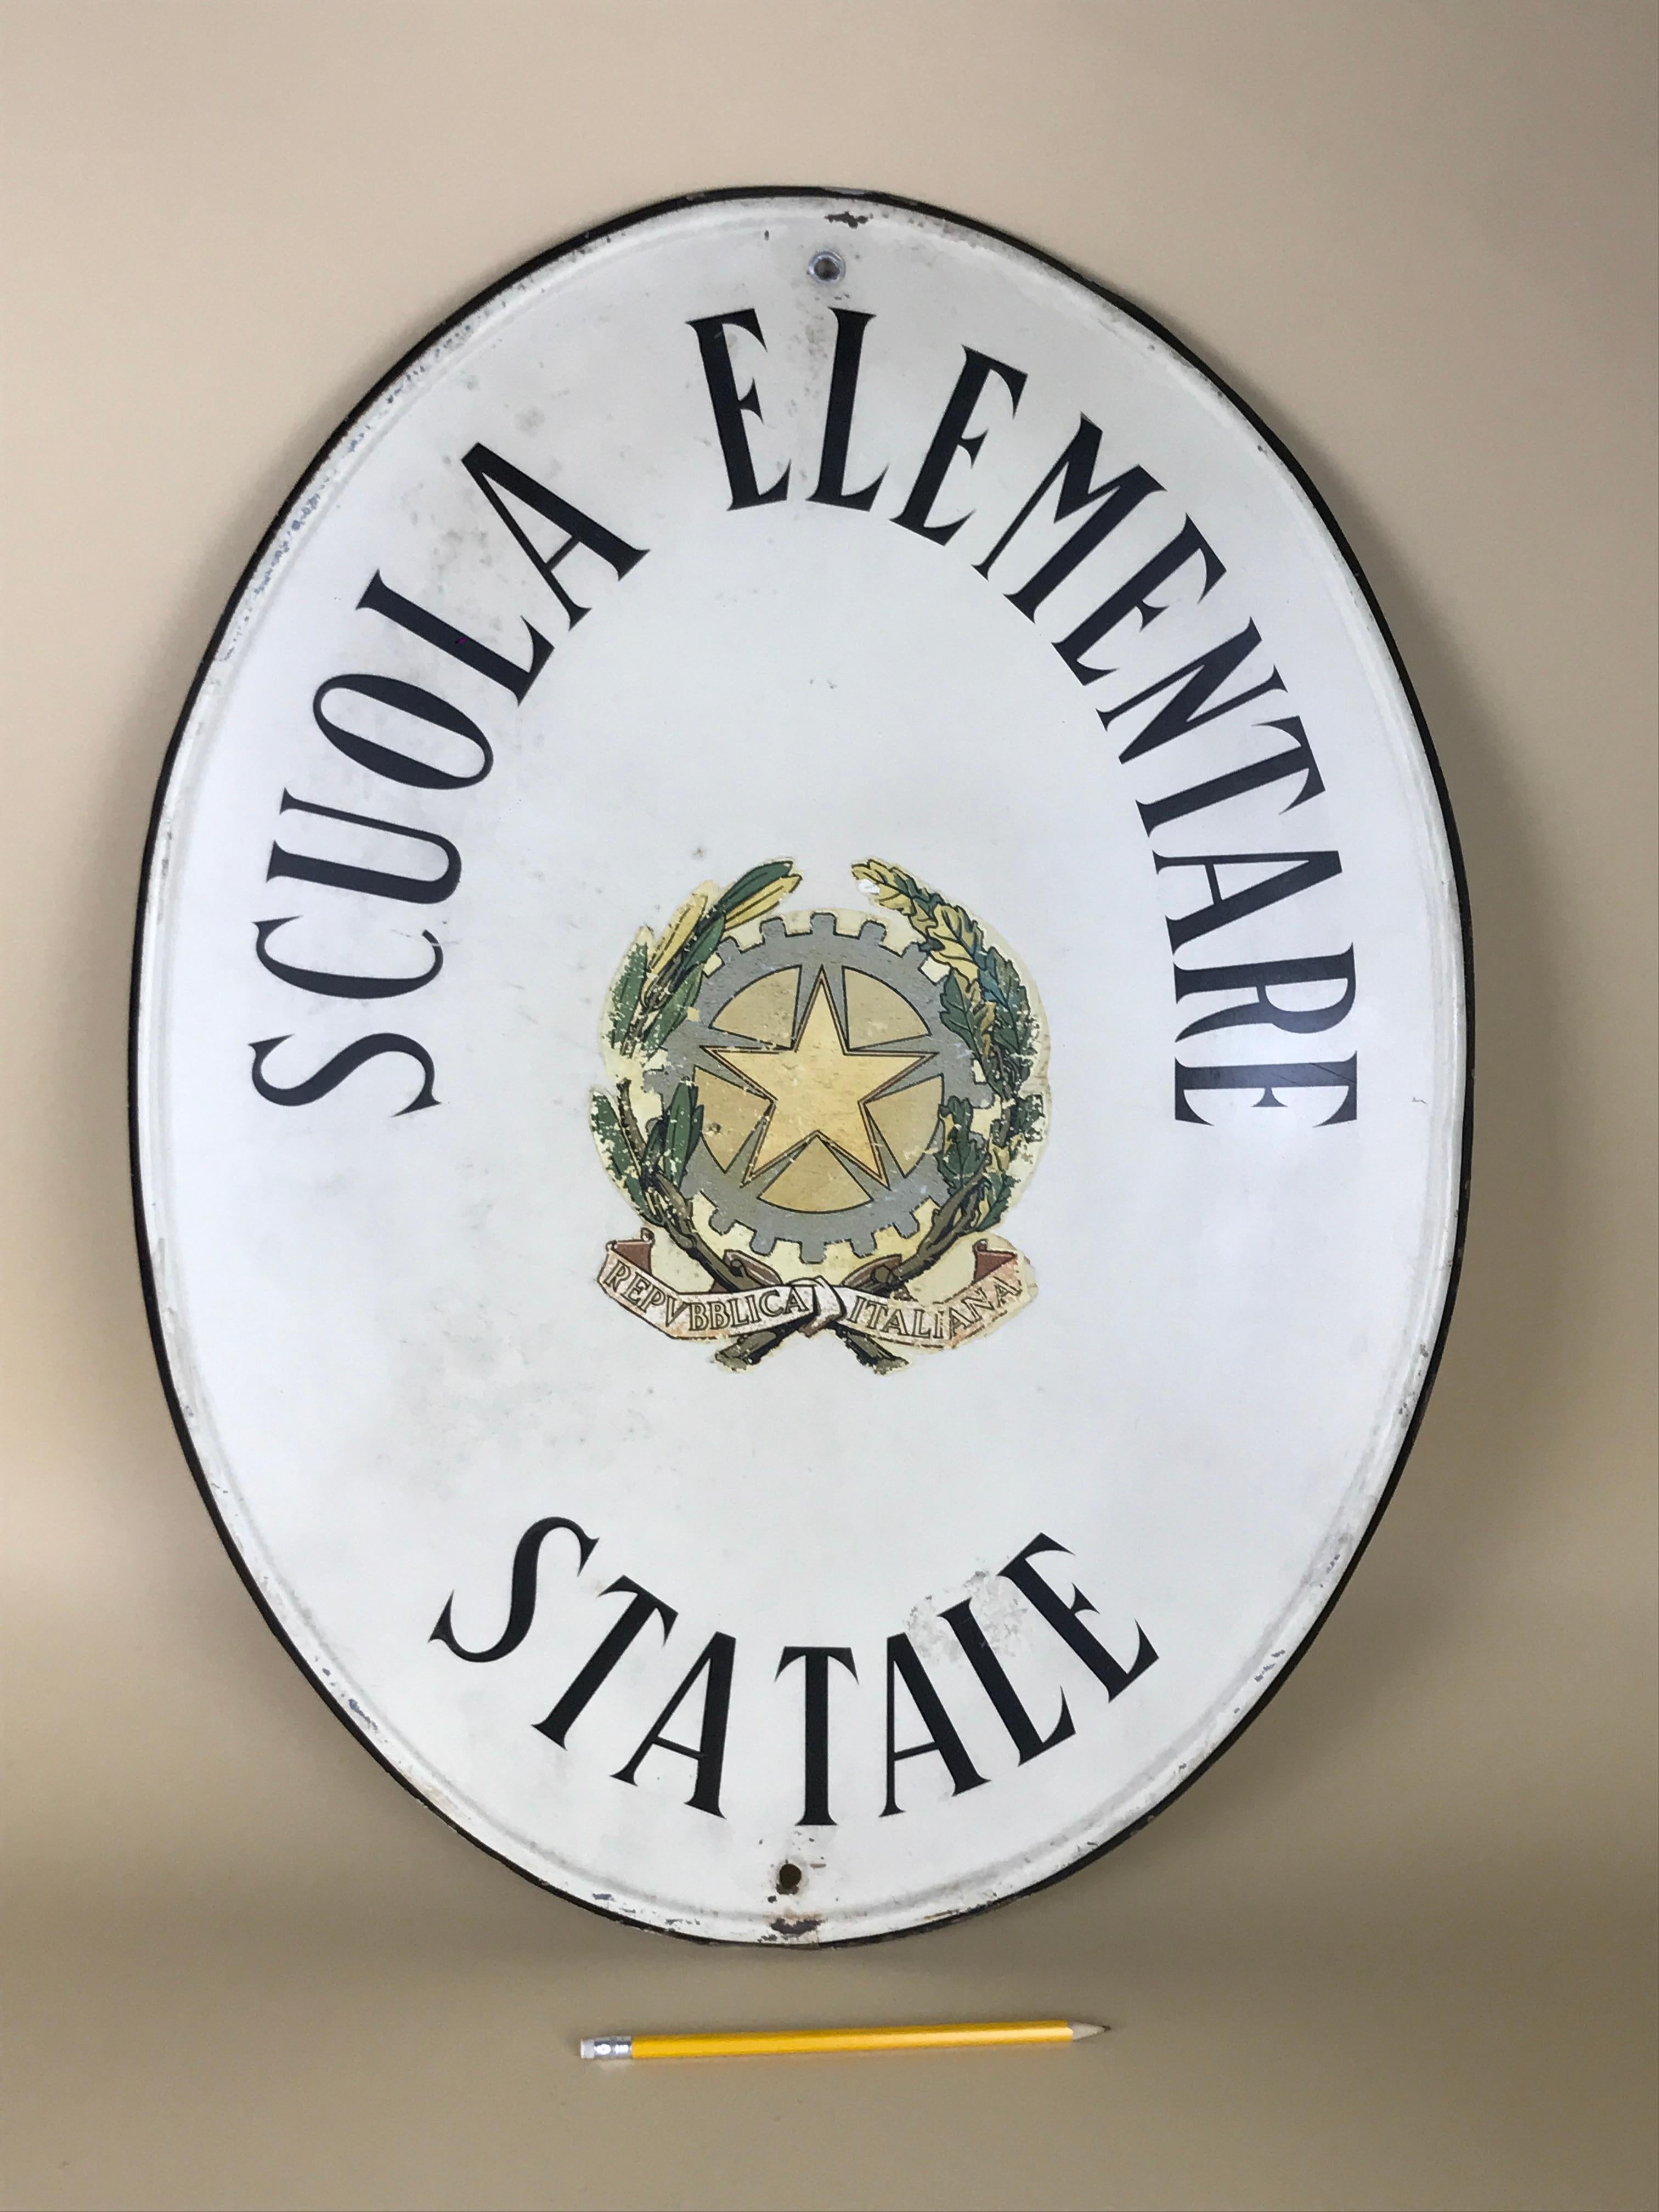 Vintage oval screen printed Italian metal sign ‘Scuola elementare statale’ or State primary school. The sign has a oval relief profile and black line profile on what is now a light cream background.
At the centre there is the very nice emblem of